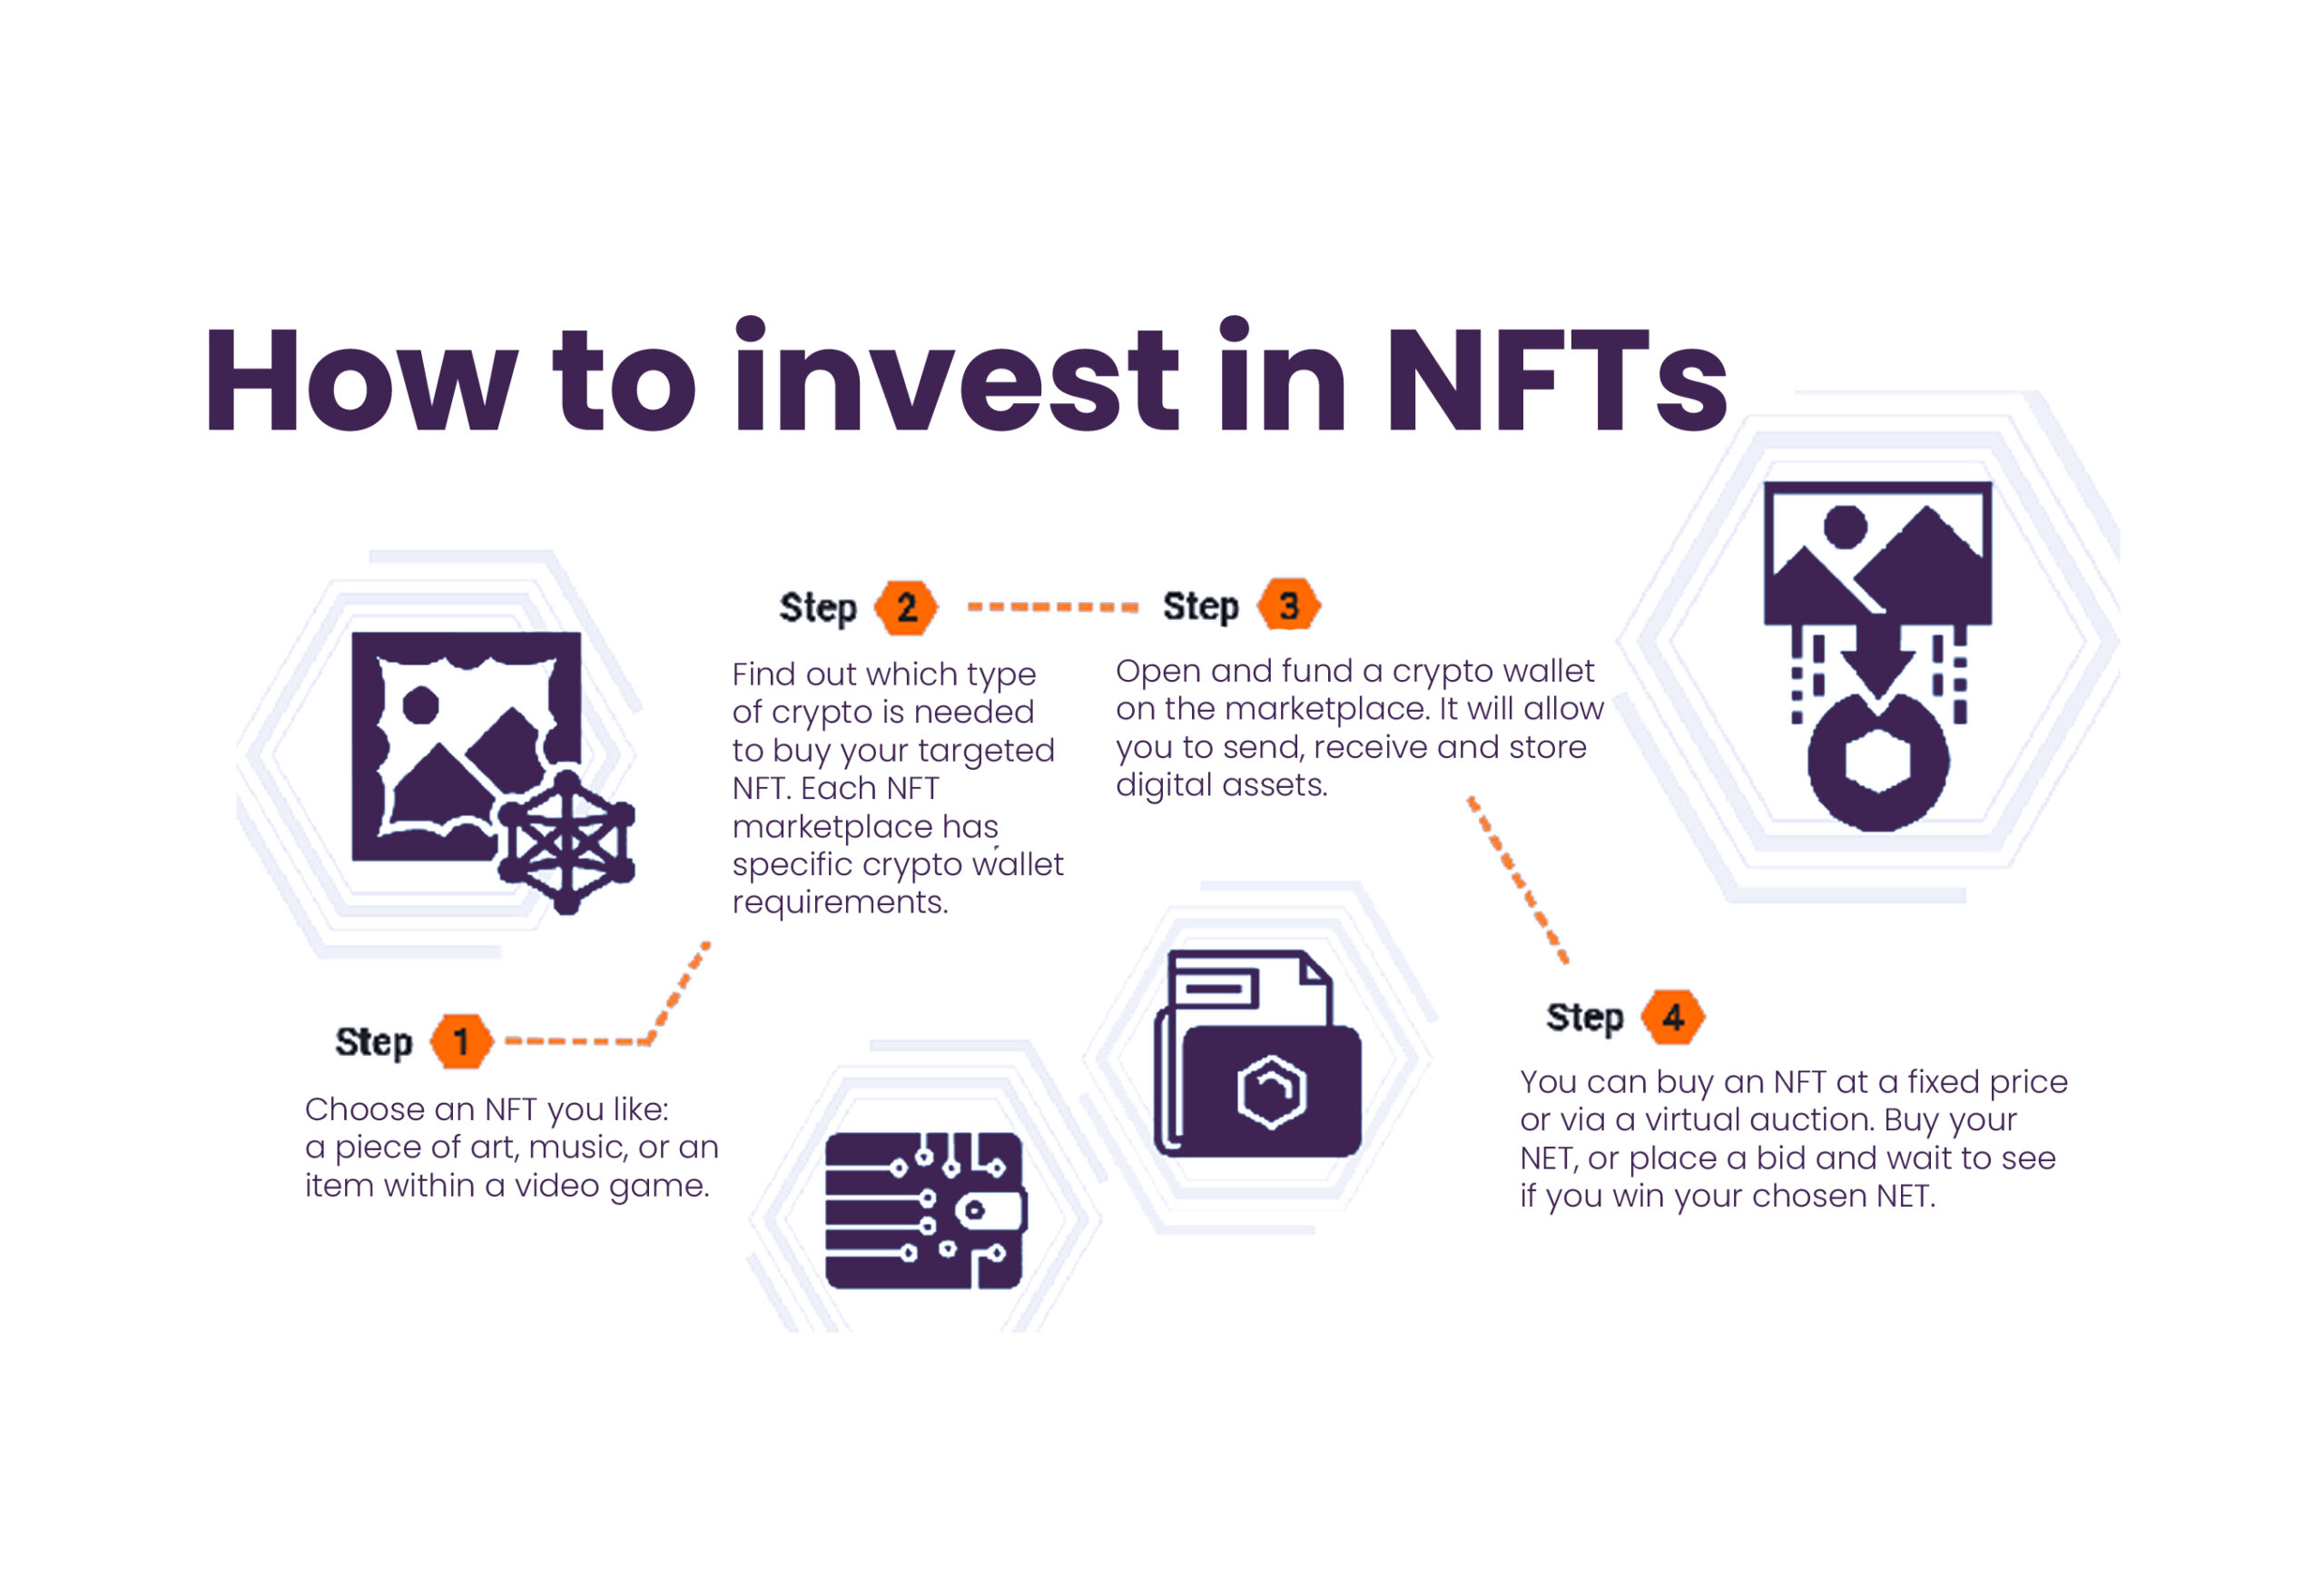 Invest Money in NFTs